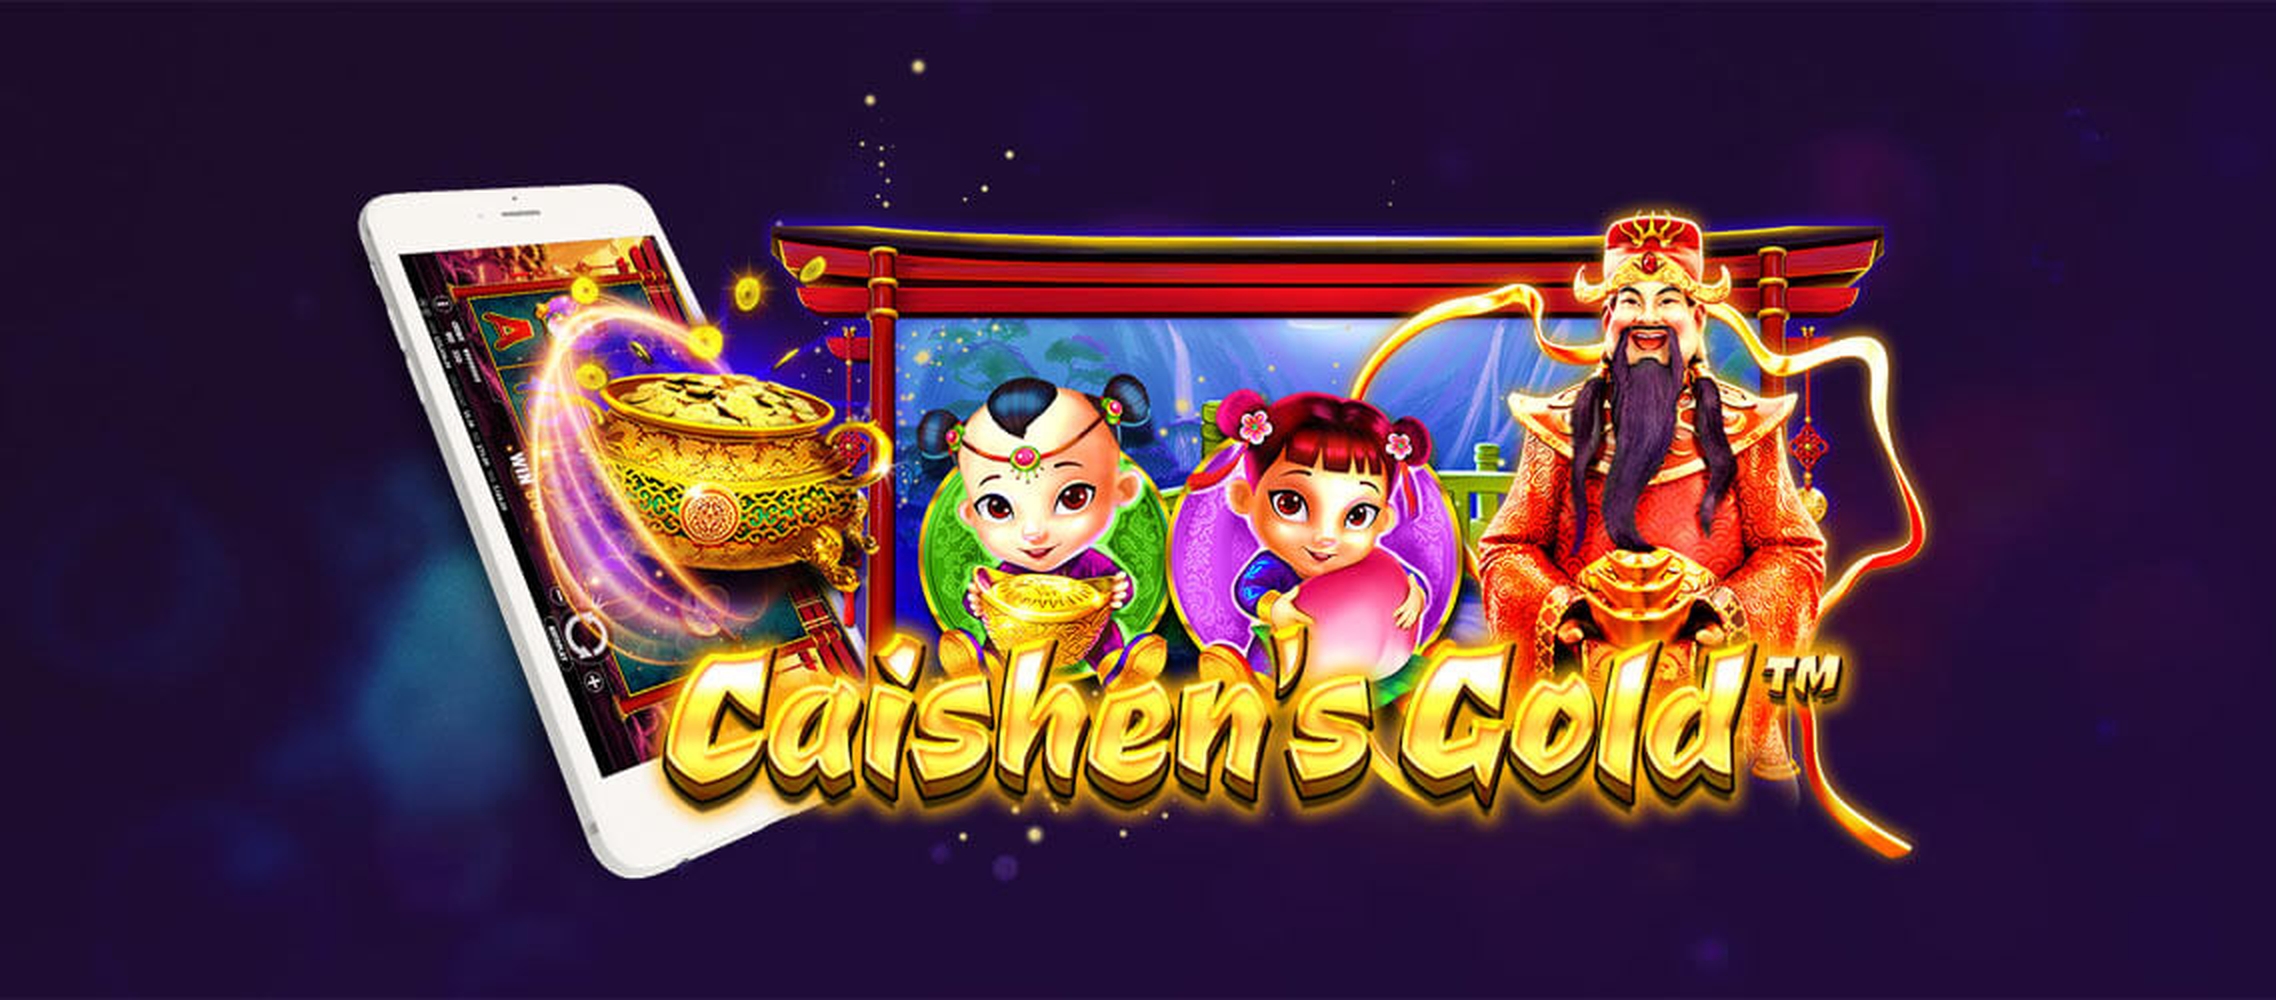 The Caishen's Gold Online Slot Demo Game by Pragmatic Play